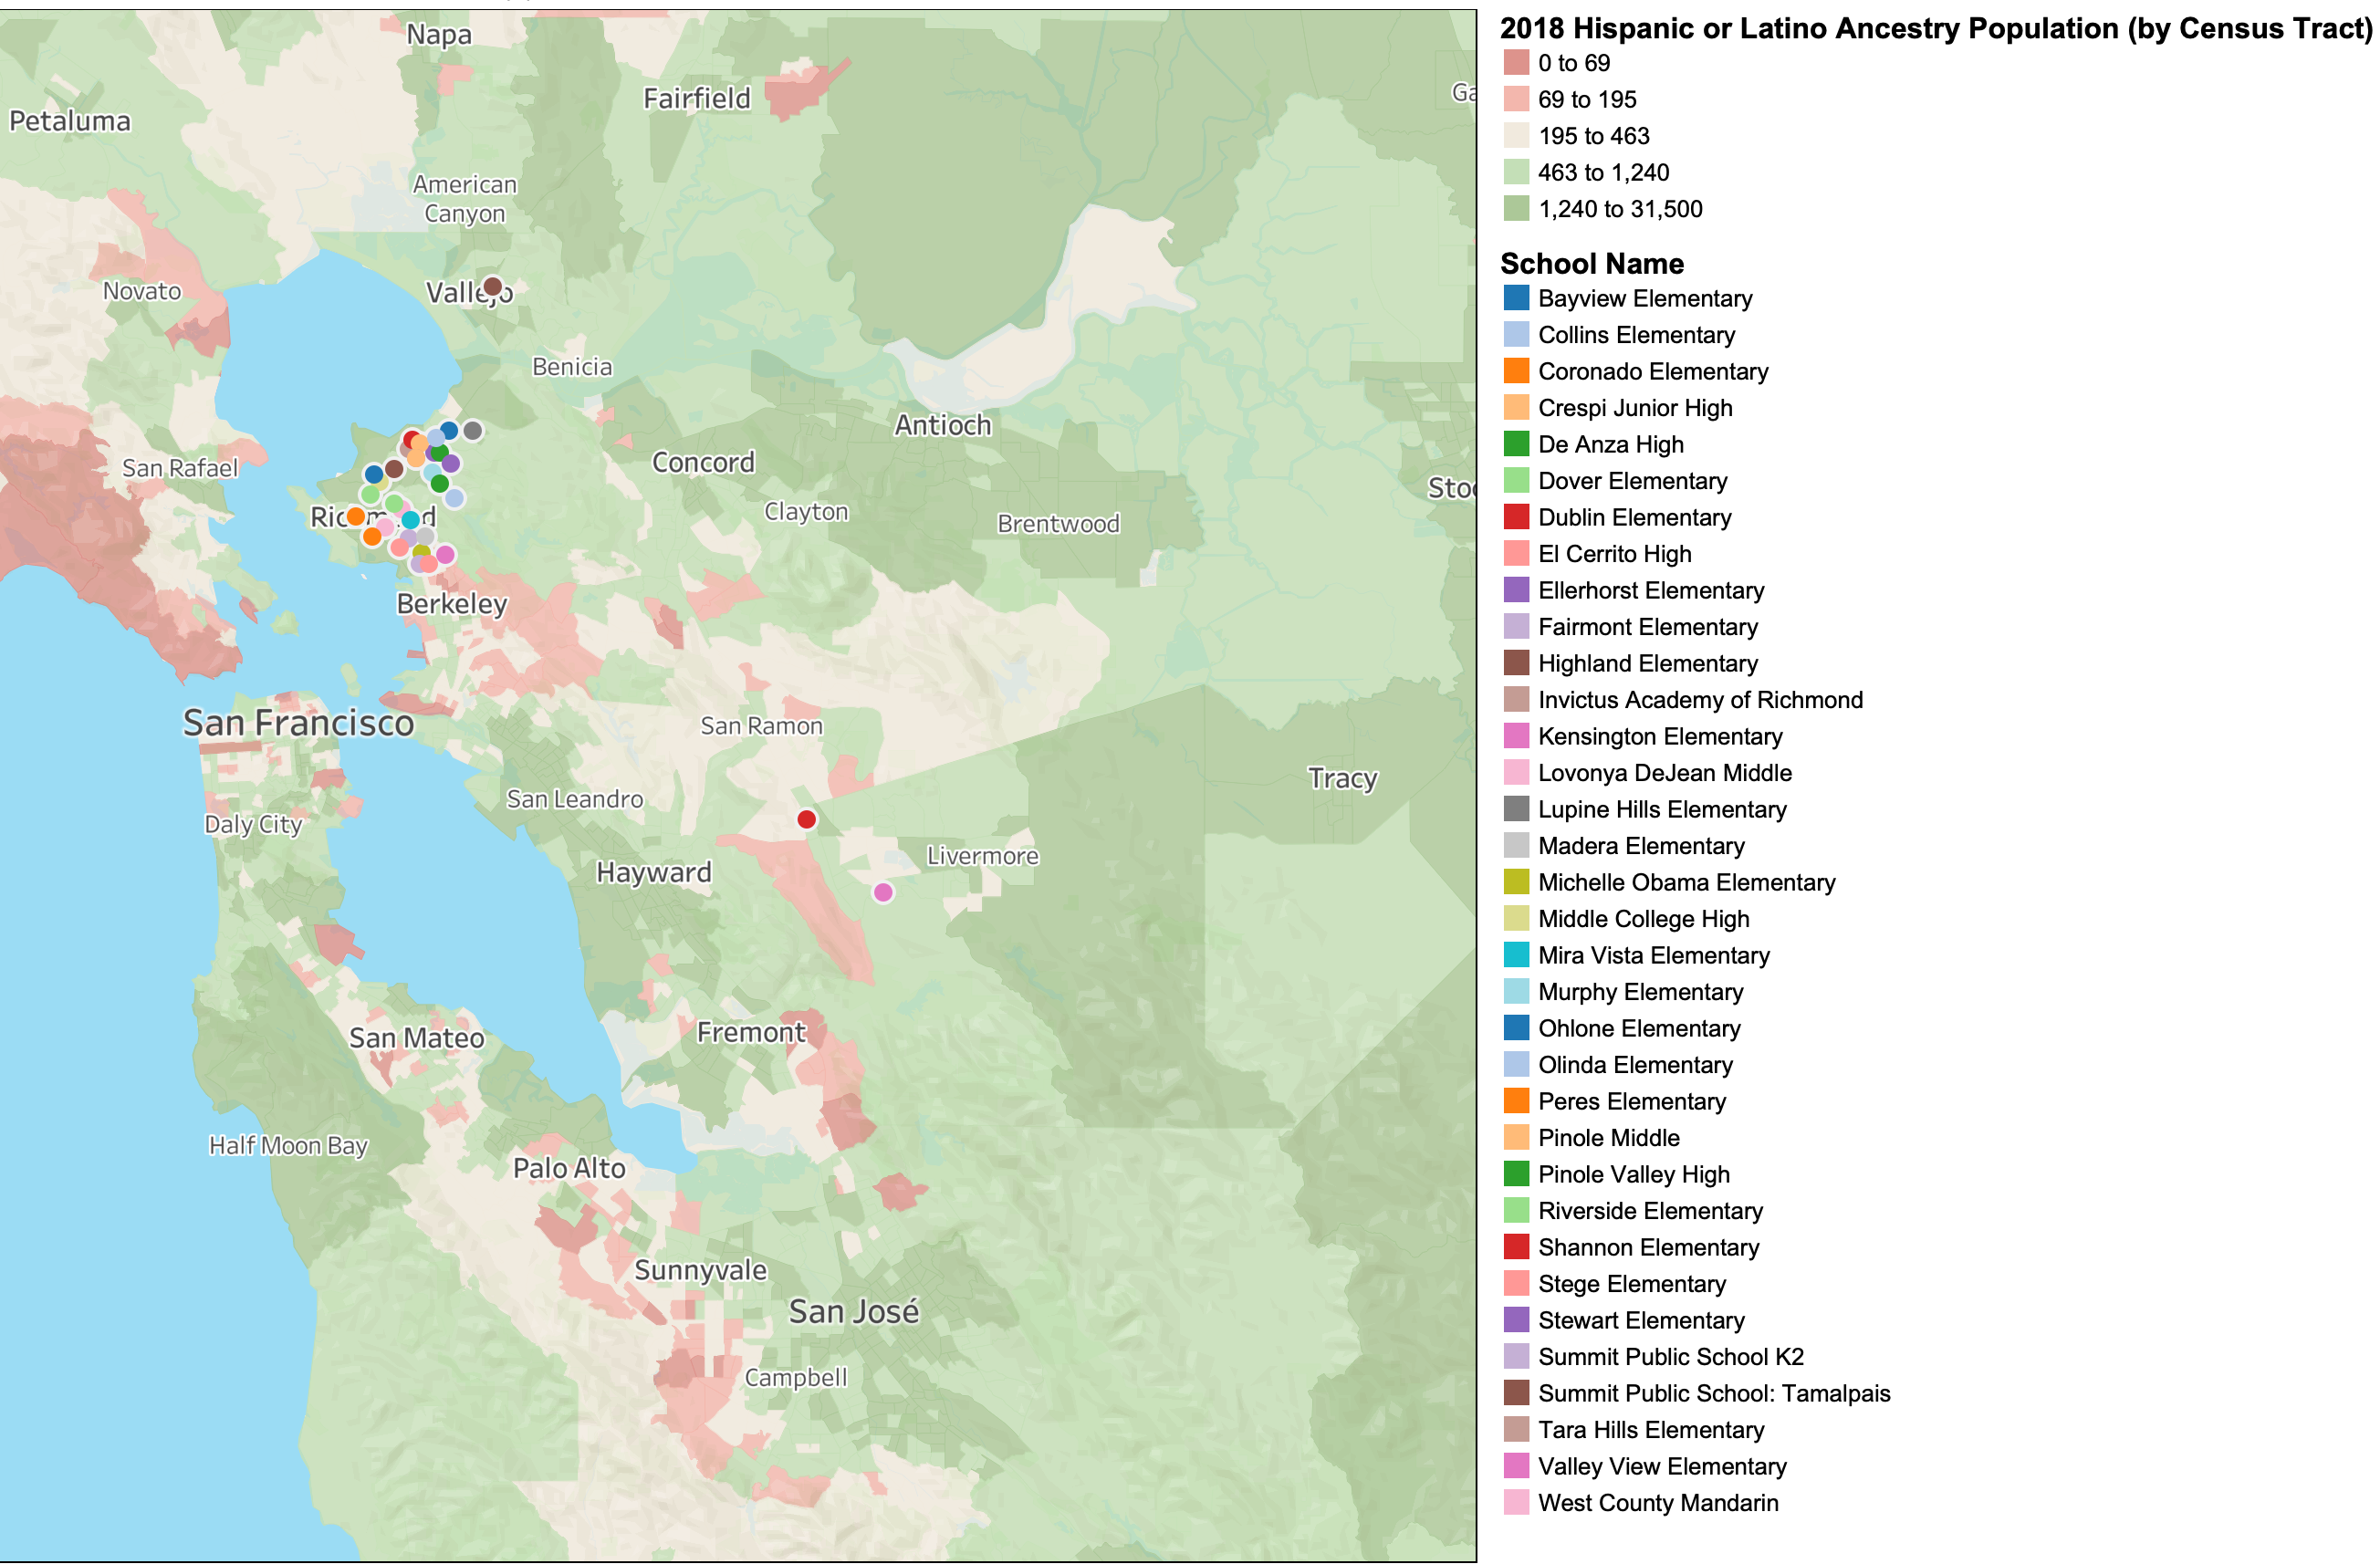 Map of Hispanic or Latino demographics in the Bay Area